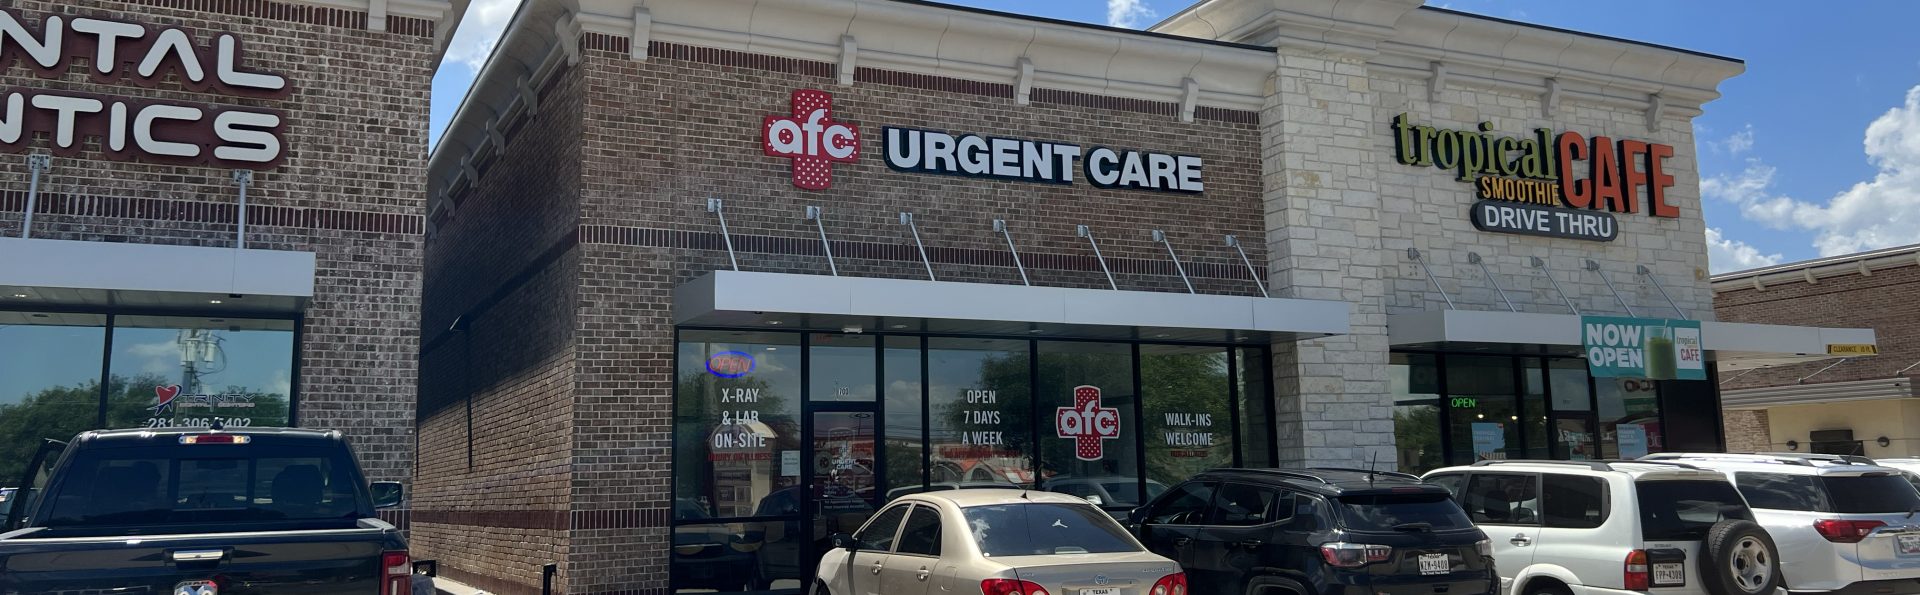 Visit our urgent care center in Humble, TX